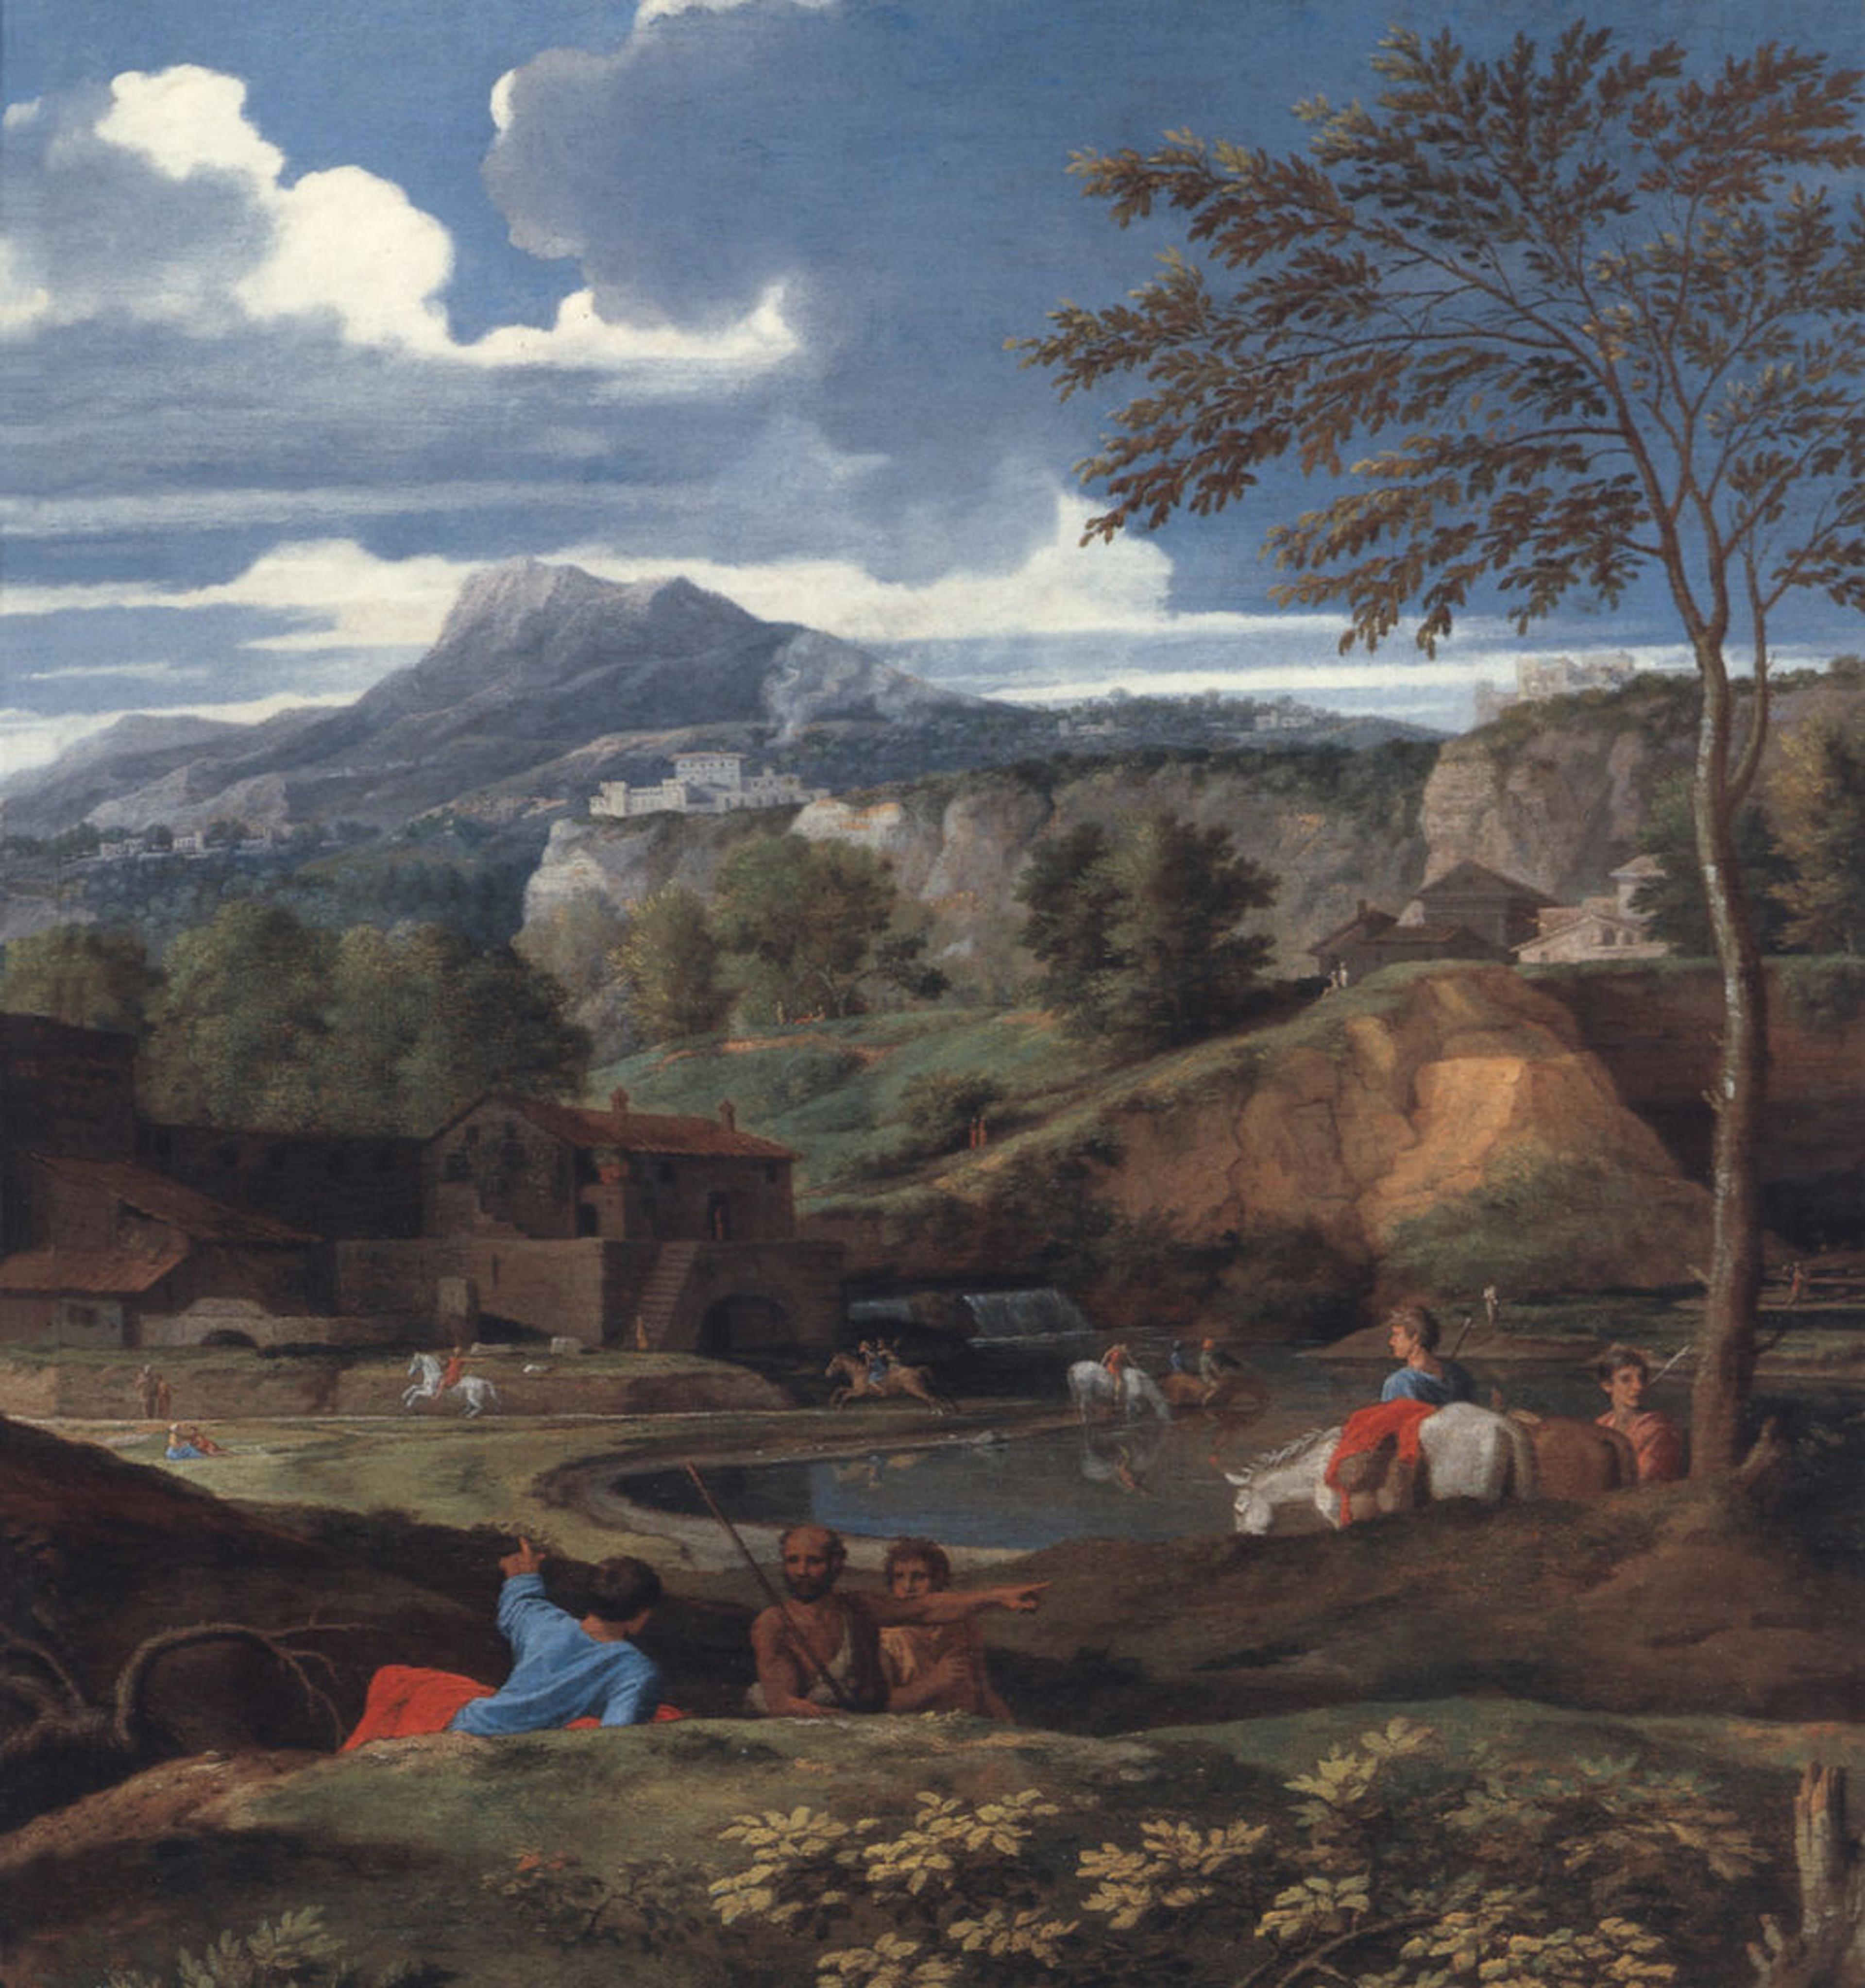 Detail view of a Nicolas Poussin painting of a pastoral scene